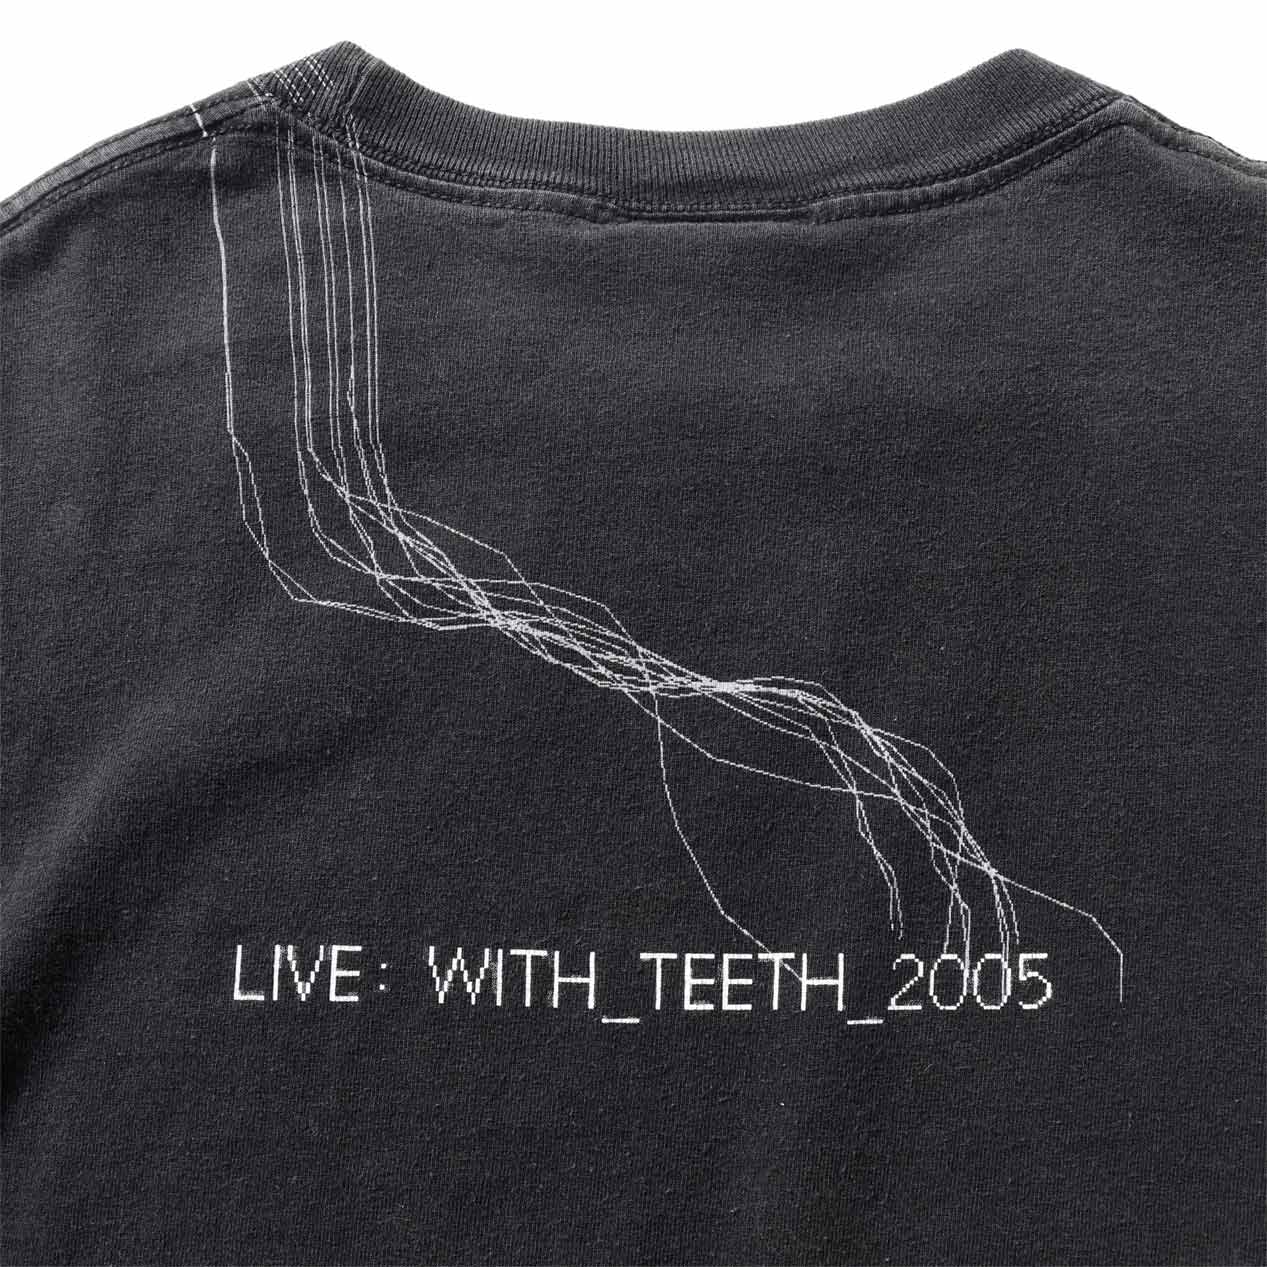 POST JUNK / 00's NINE INCH NAILS “LIVE: WITH TEETH 2005” T-Shirt [XL]